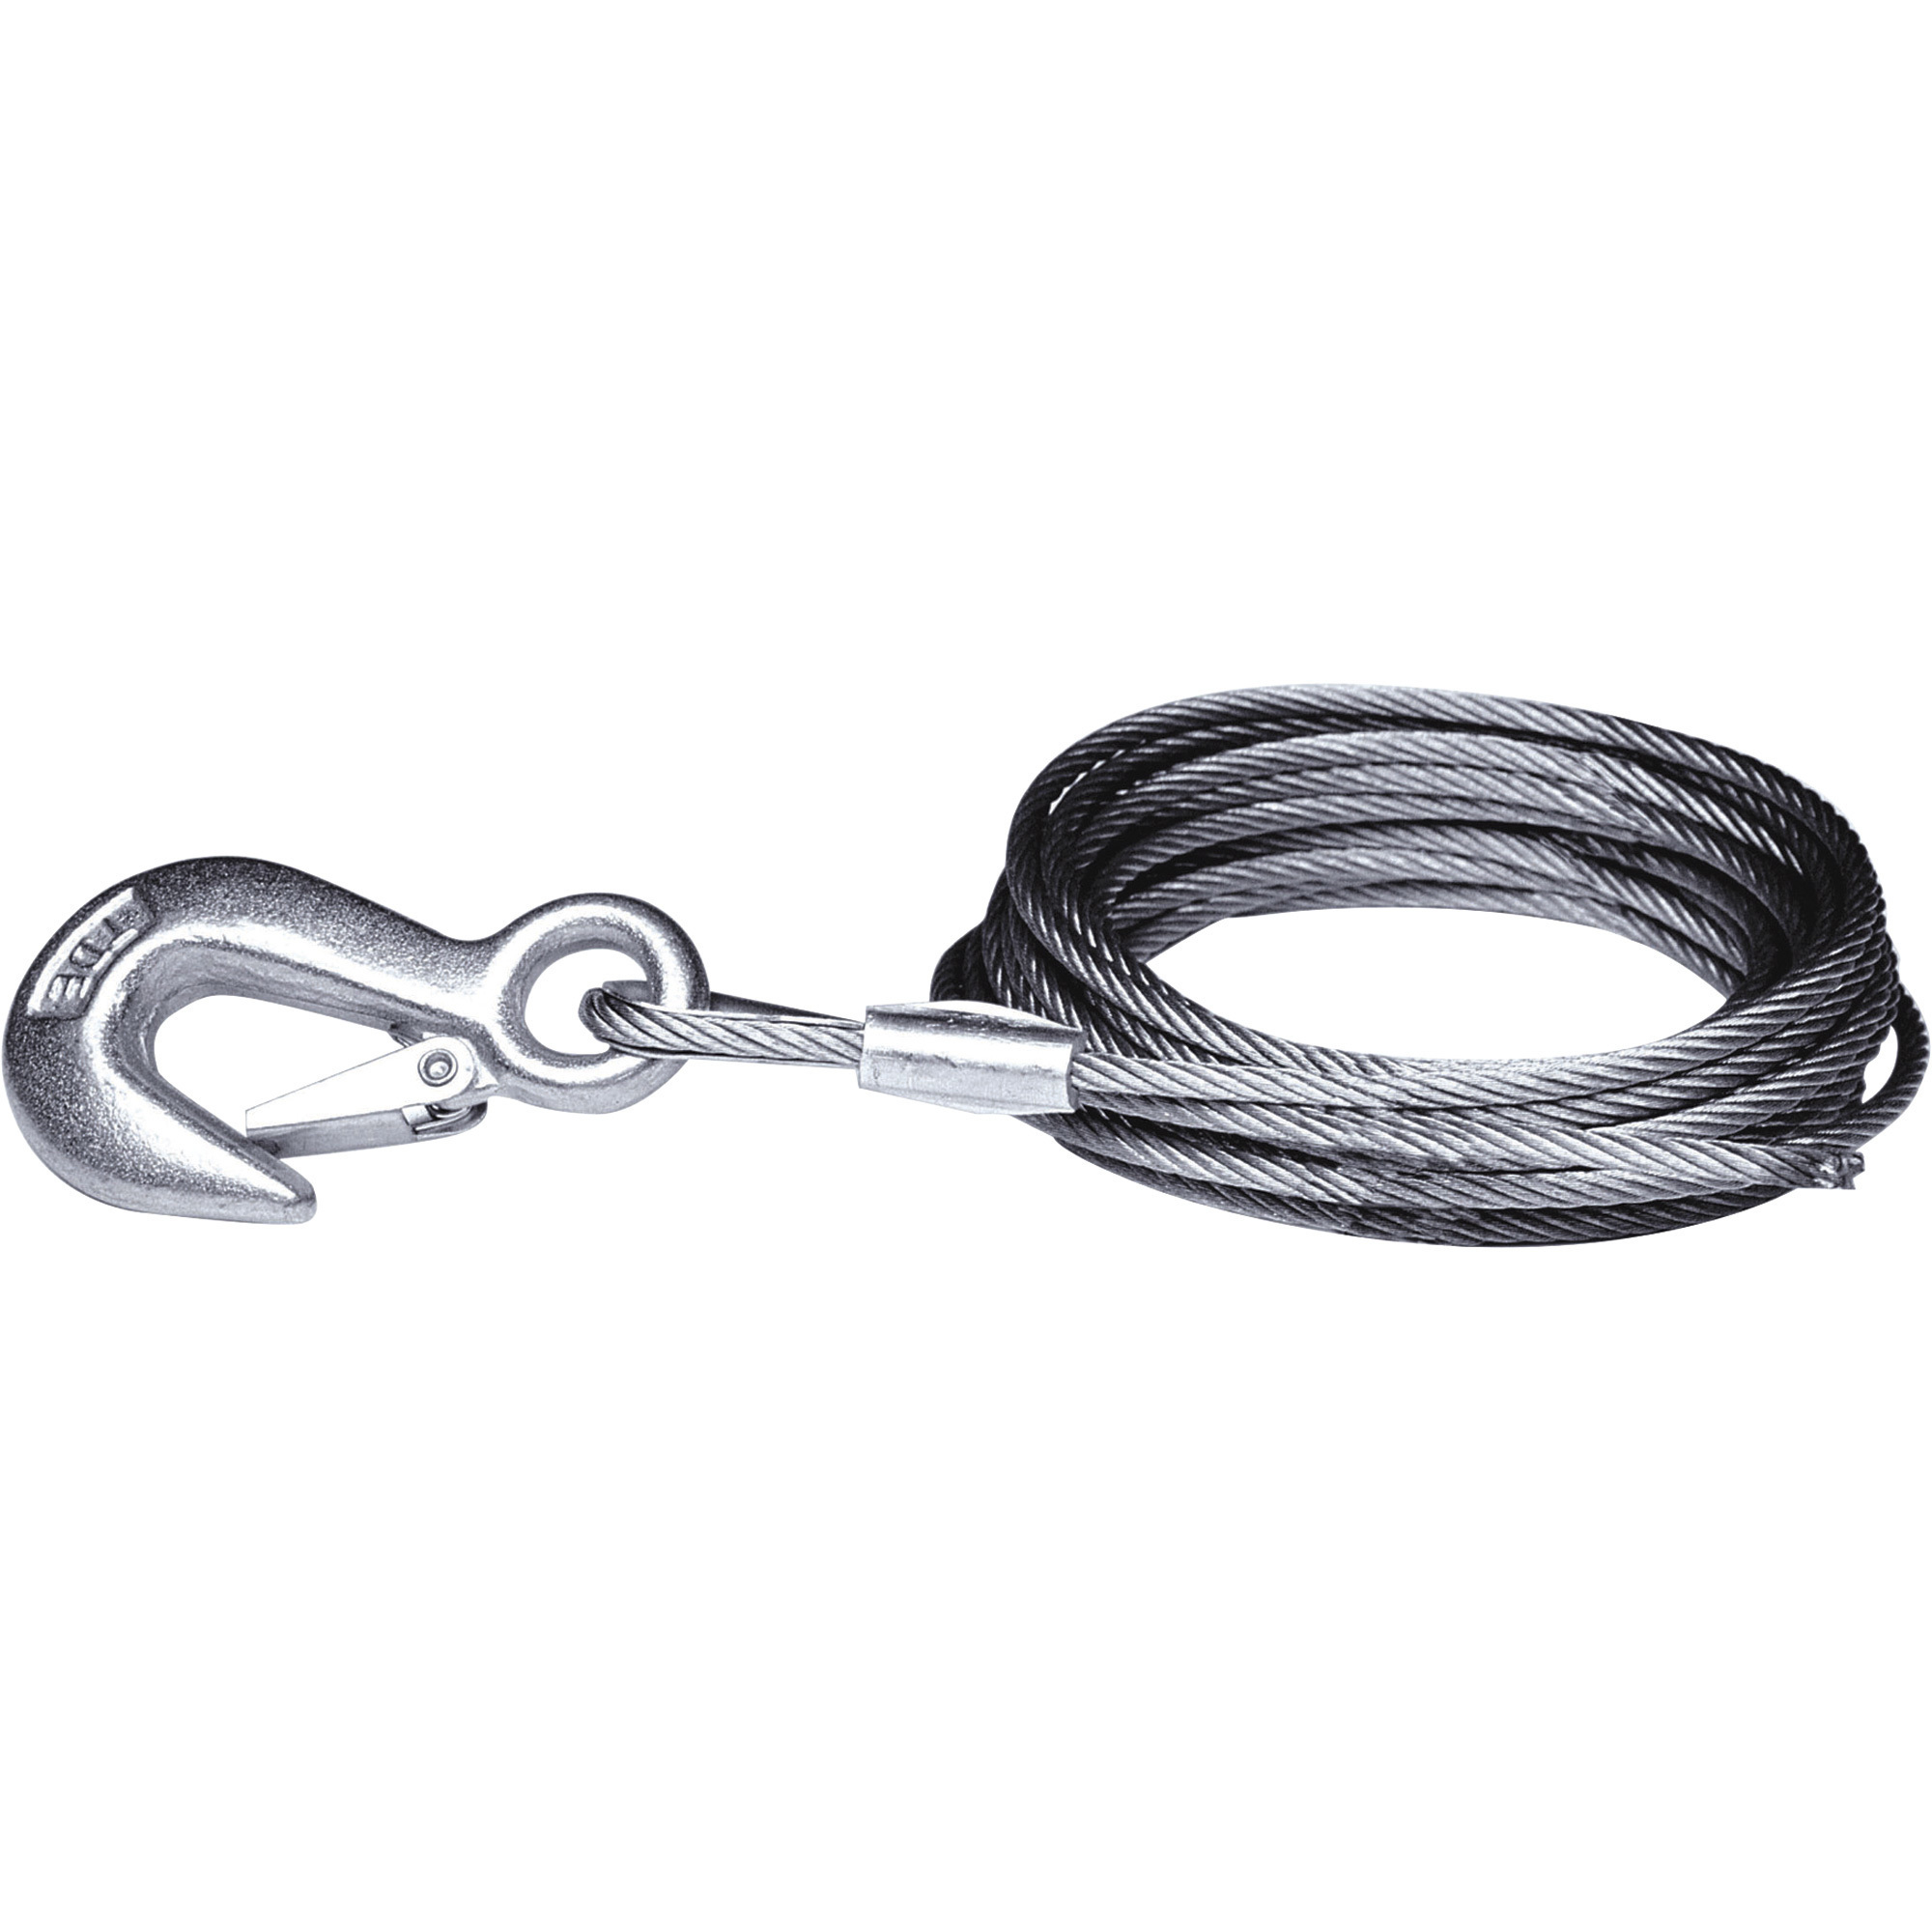 Ultra-Tow Steel Winch Cable with Hook â 20ft.L x 1/8Inch Diameter, 2000-lb. Breaking Strength